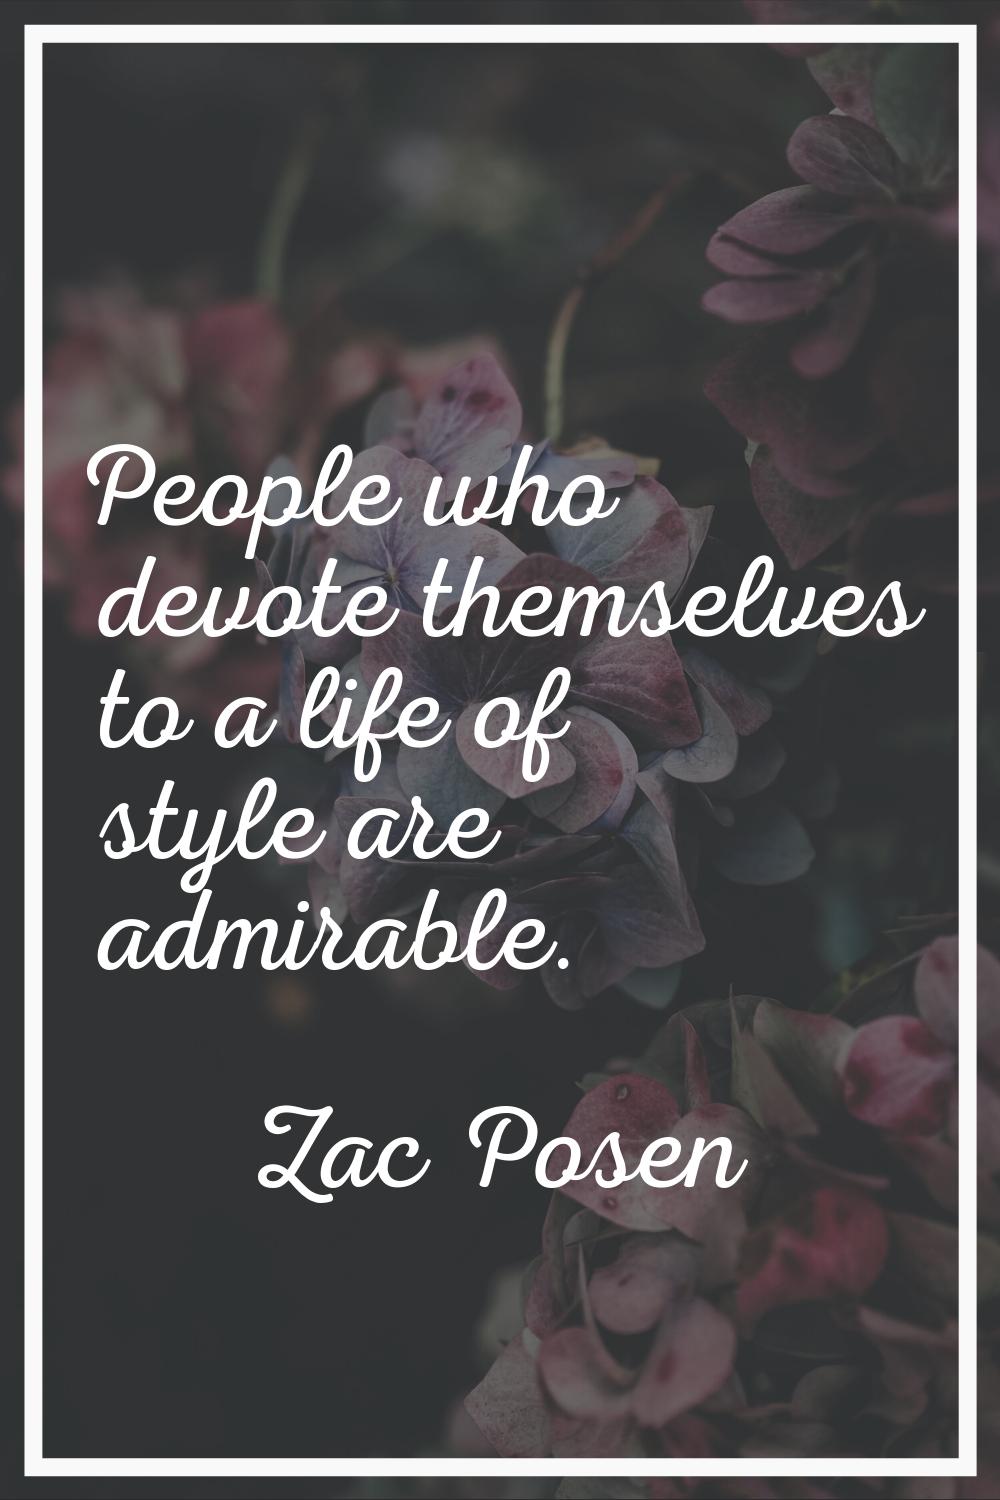 People who devote themselves to a life of style are admirable.